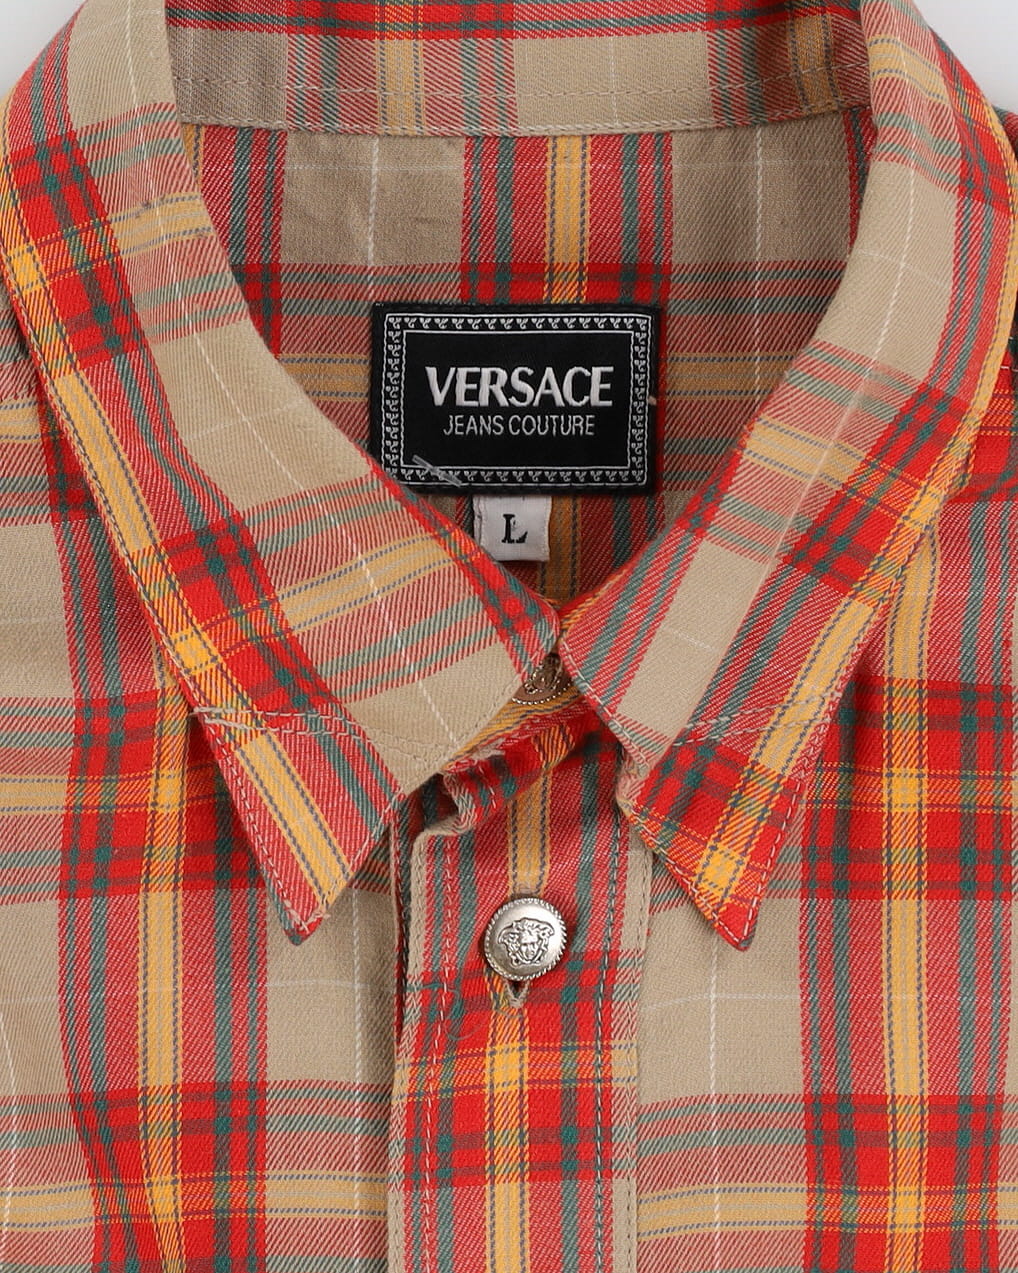 Versace Western Style Patterned Shirt - L